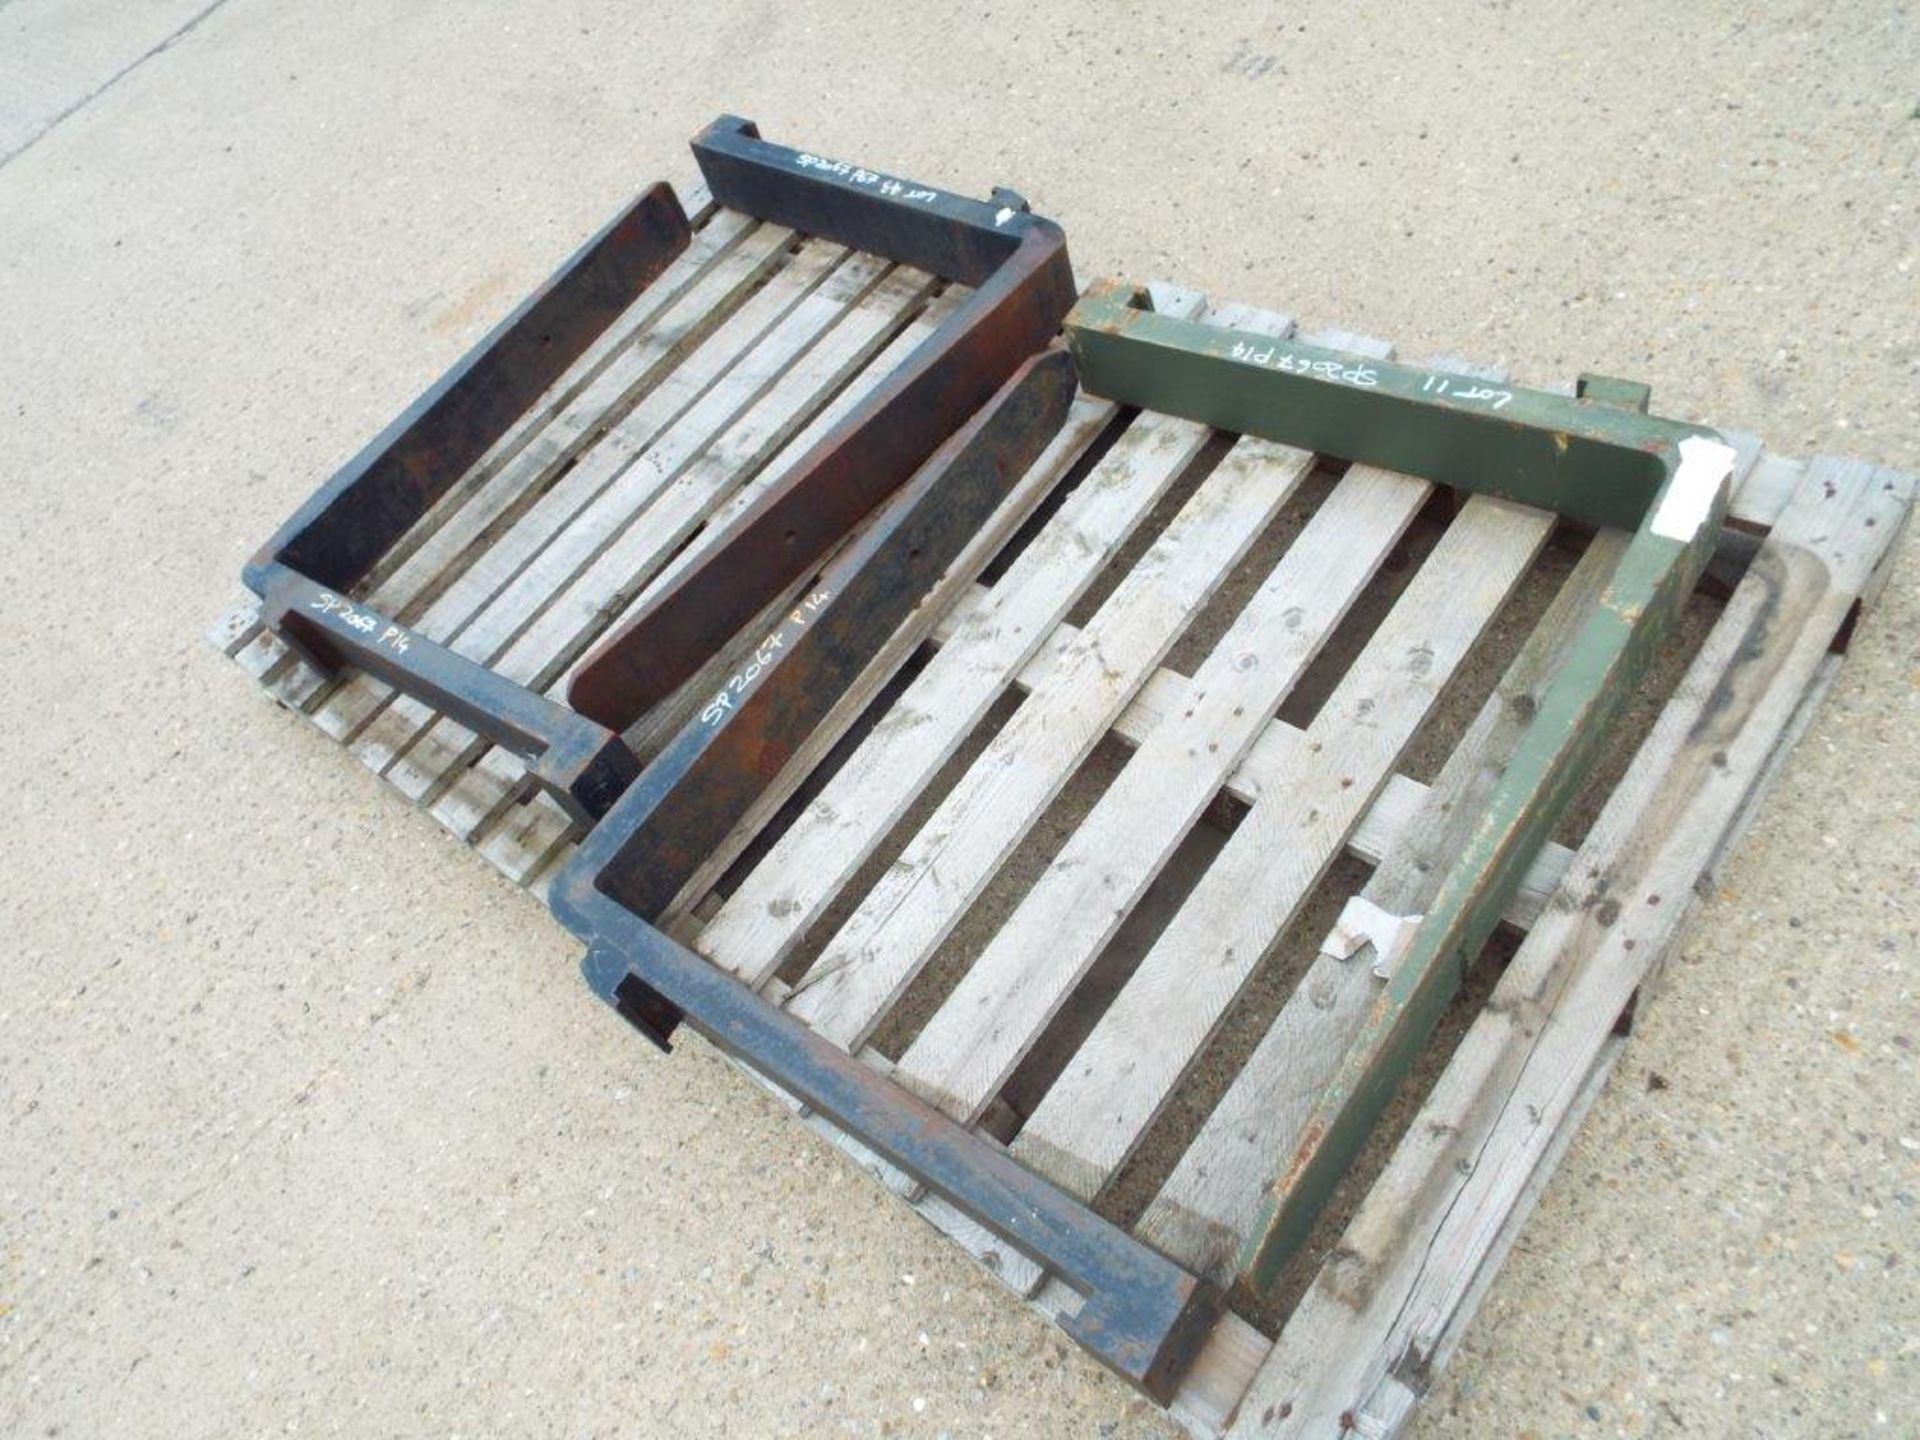 4 x 3' Forklift Tines